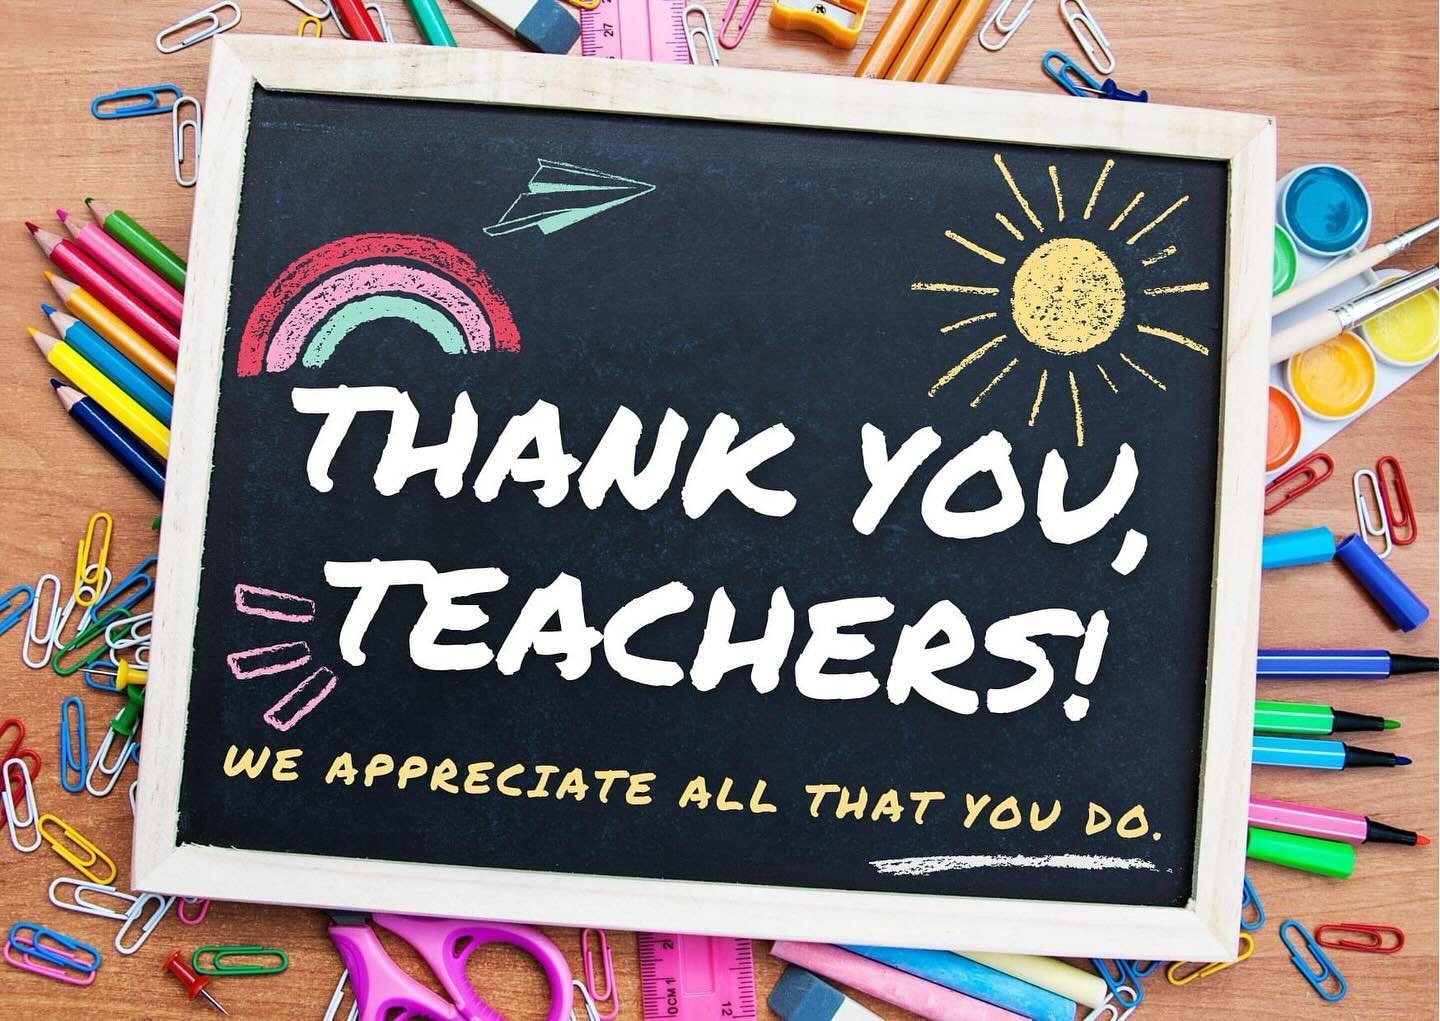 We appreciate all the wonderful teachers at Faith Christian Academy! Daily they show their dedication to educating, inspiring, and nurturing students. The impact they have goes far beyond the classroom, shaping young minds and instilling values that 